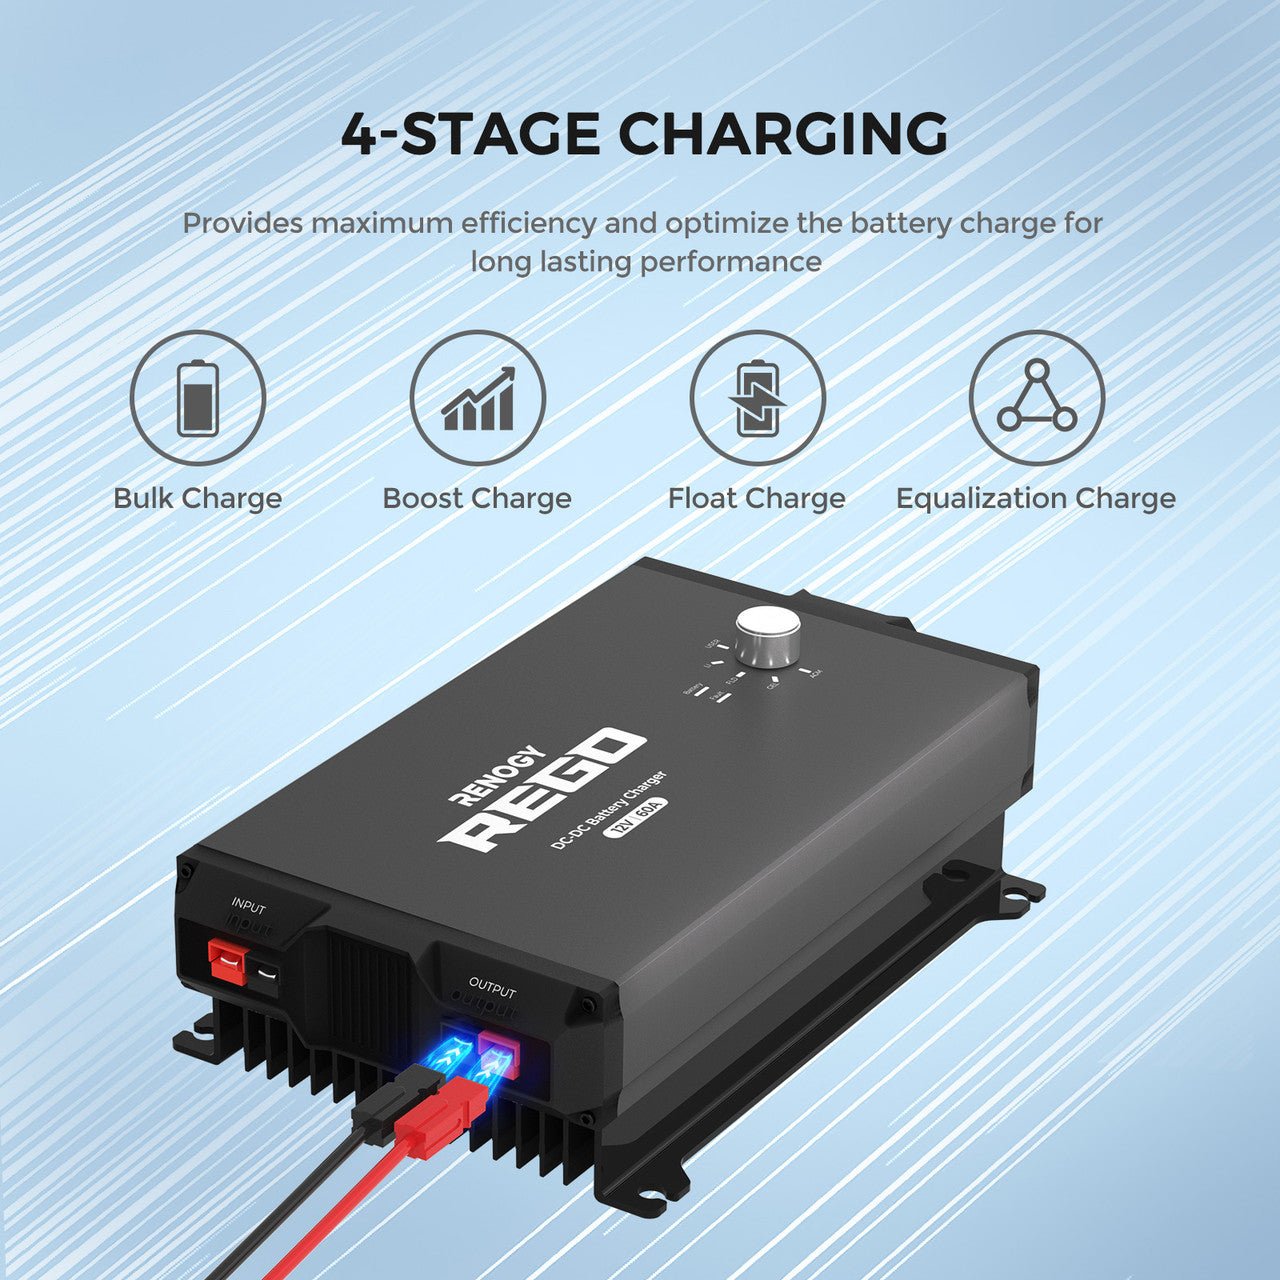 Renogy REGO 12V 60A DC-DC Battery Charger - Solar Generators and Power Stations Plus